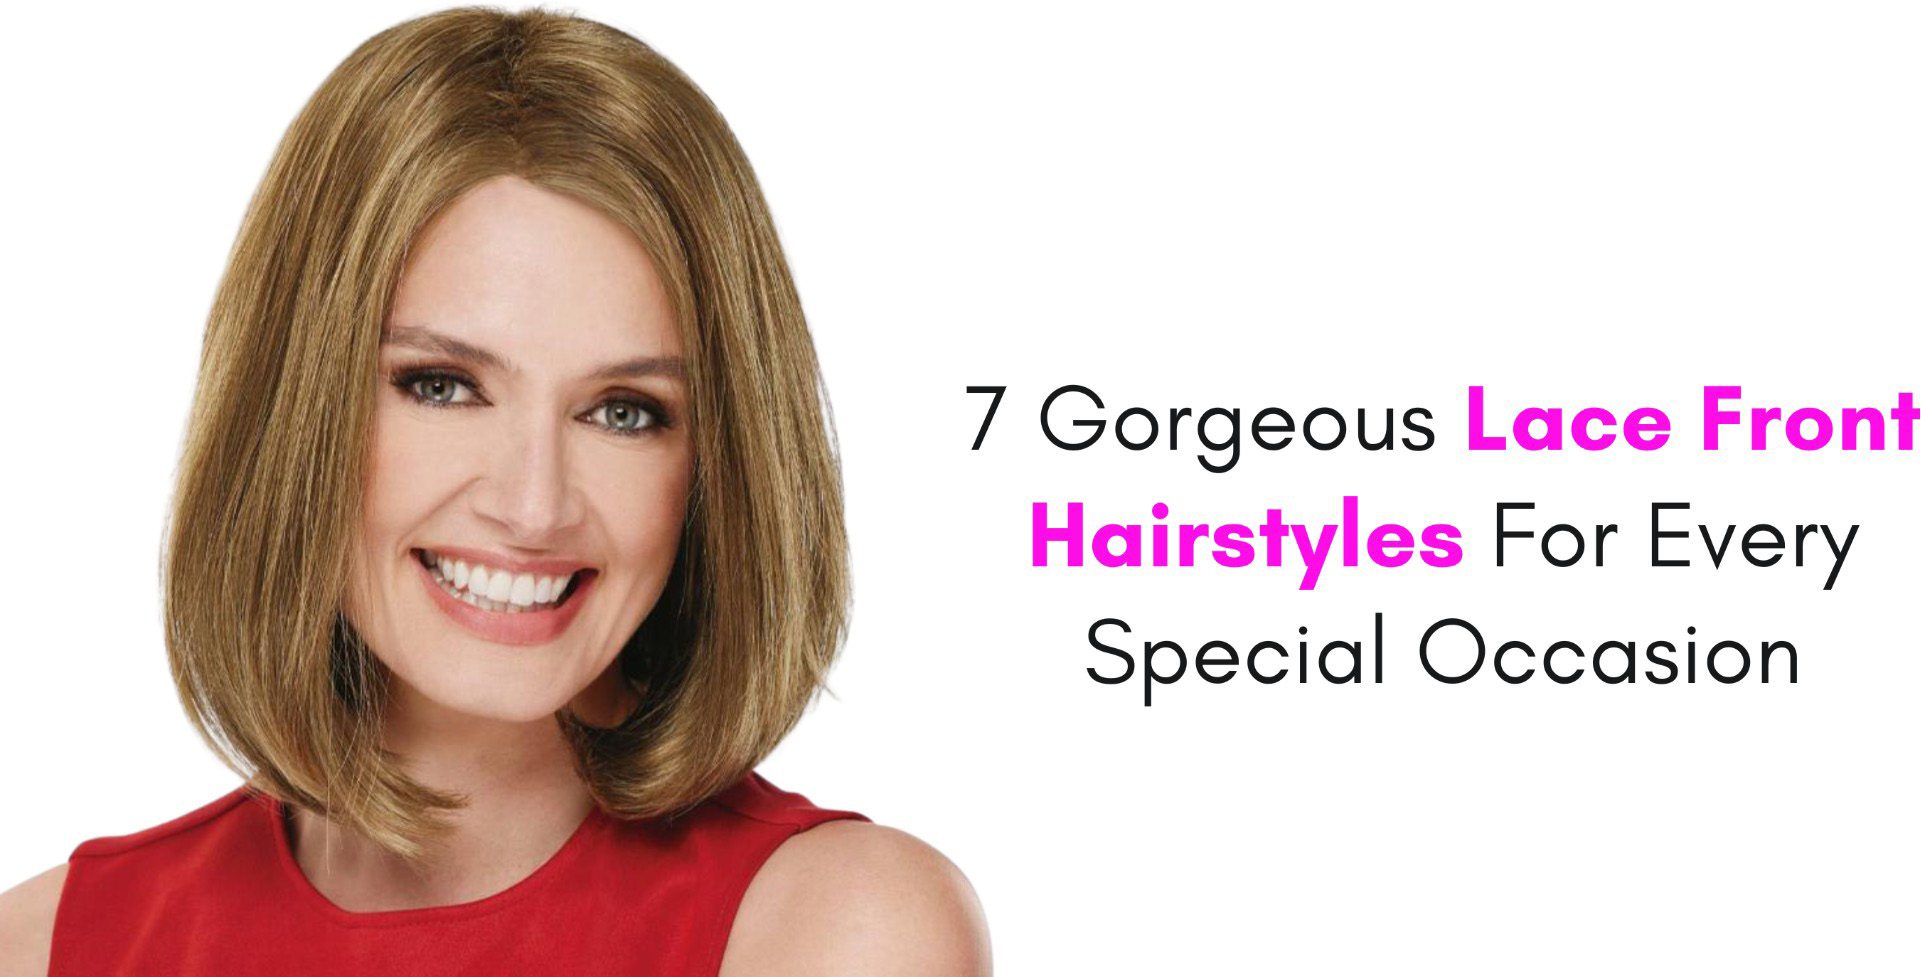 7 gorgeous lace front hairstyles for every special occasion